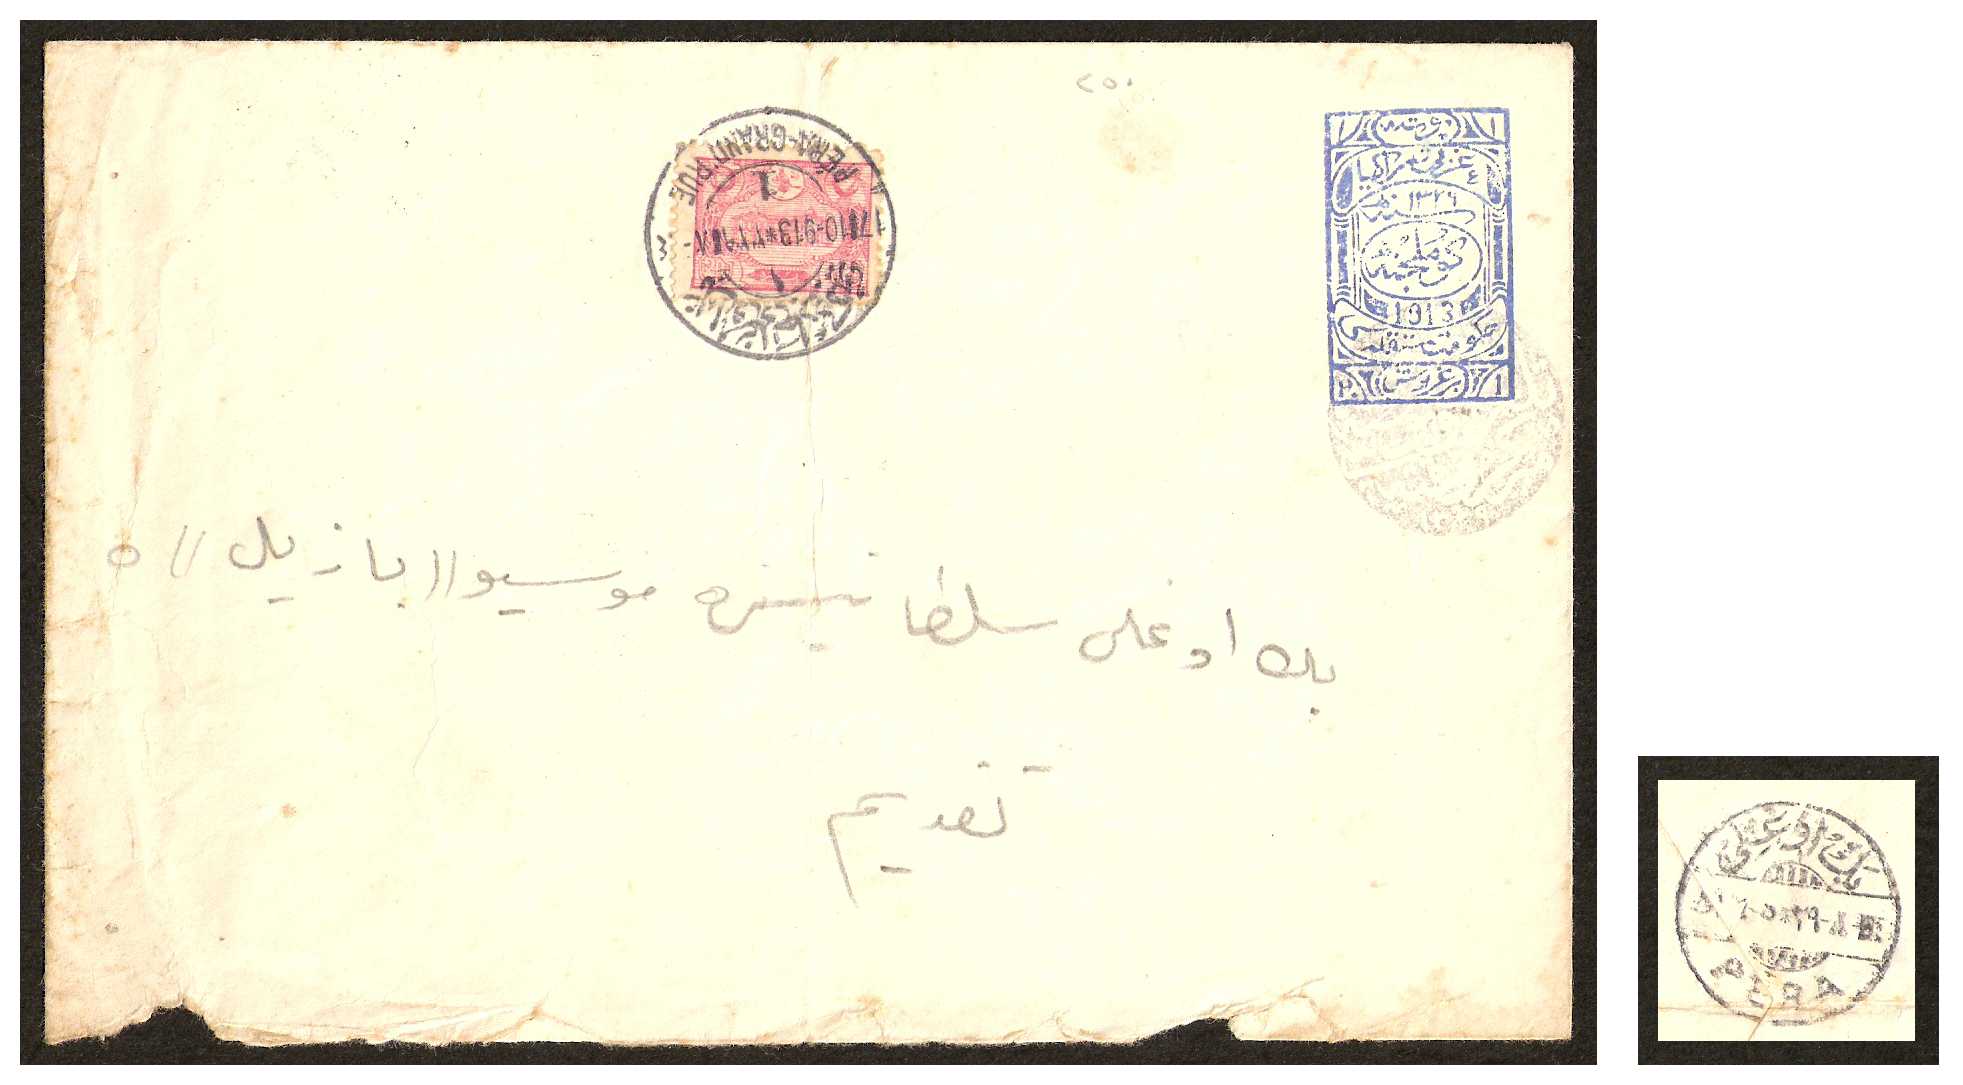 11.10.1913 Greece Thrace Autonomous Government of Western Thrace Mi 1-2 Cover 17.10.1913